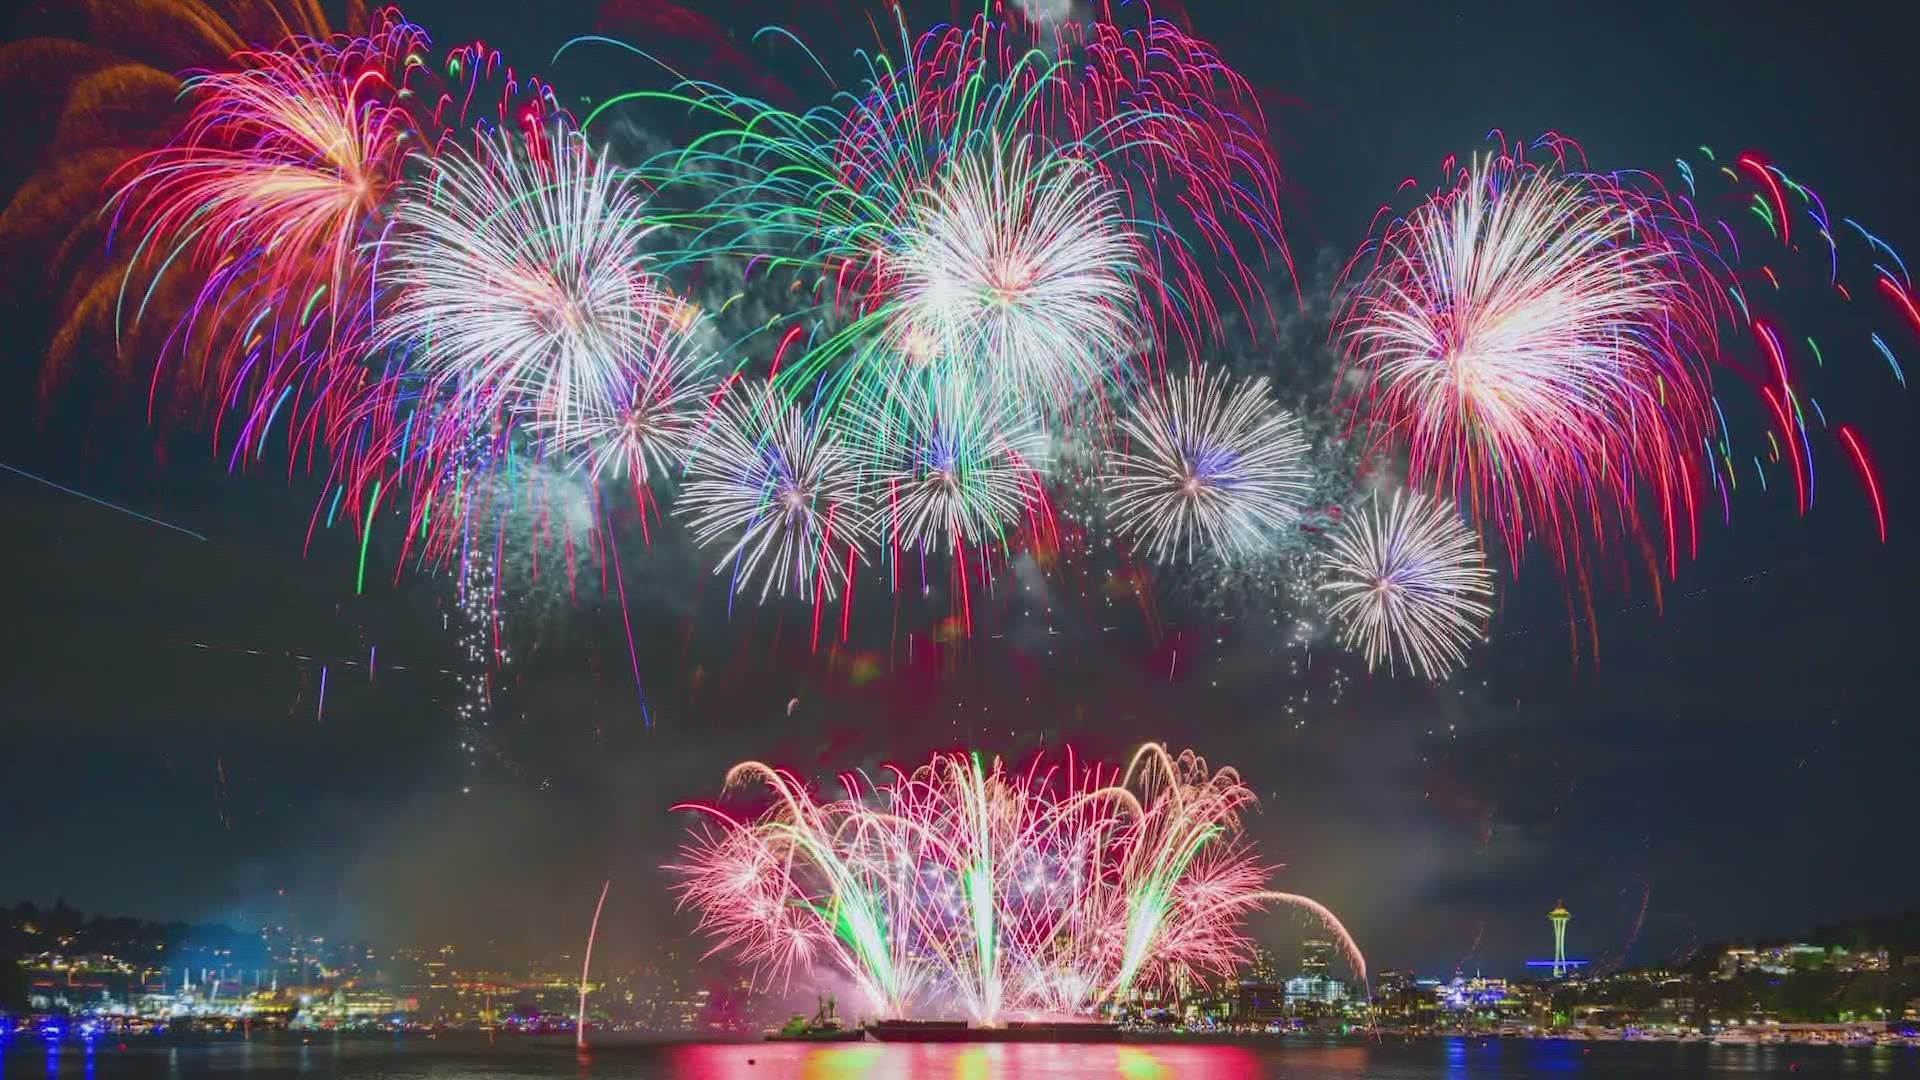 The Seafair fireworks show returned after a three year hiatus, and Tim Durkan's photos prove it was a sight to behold.